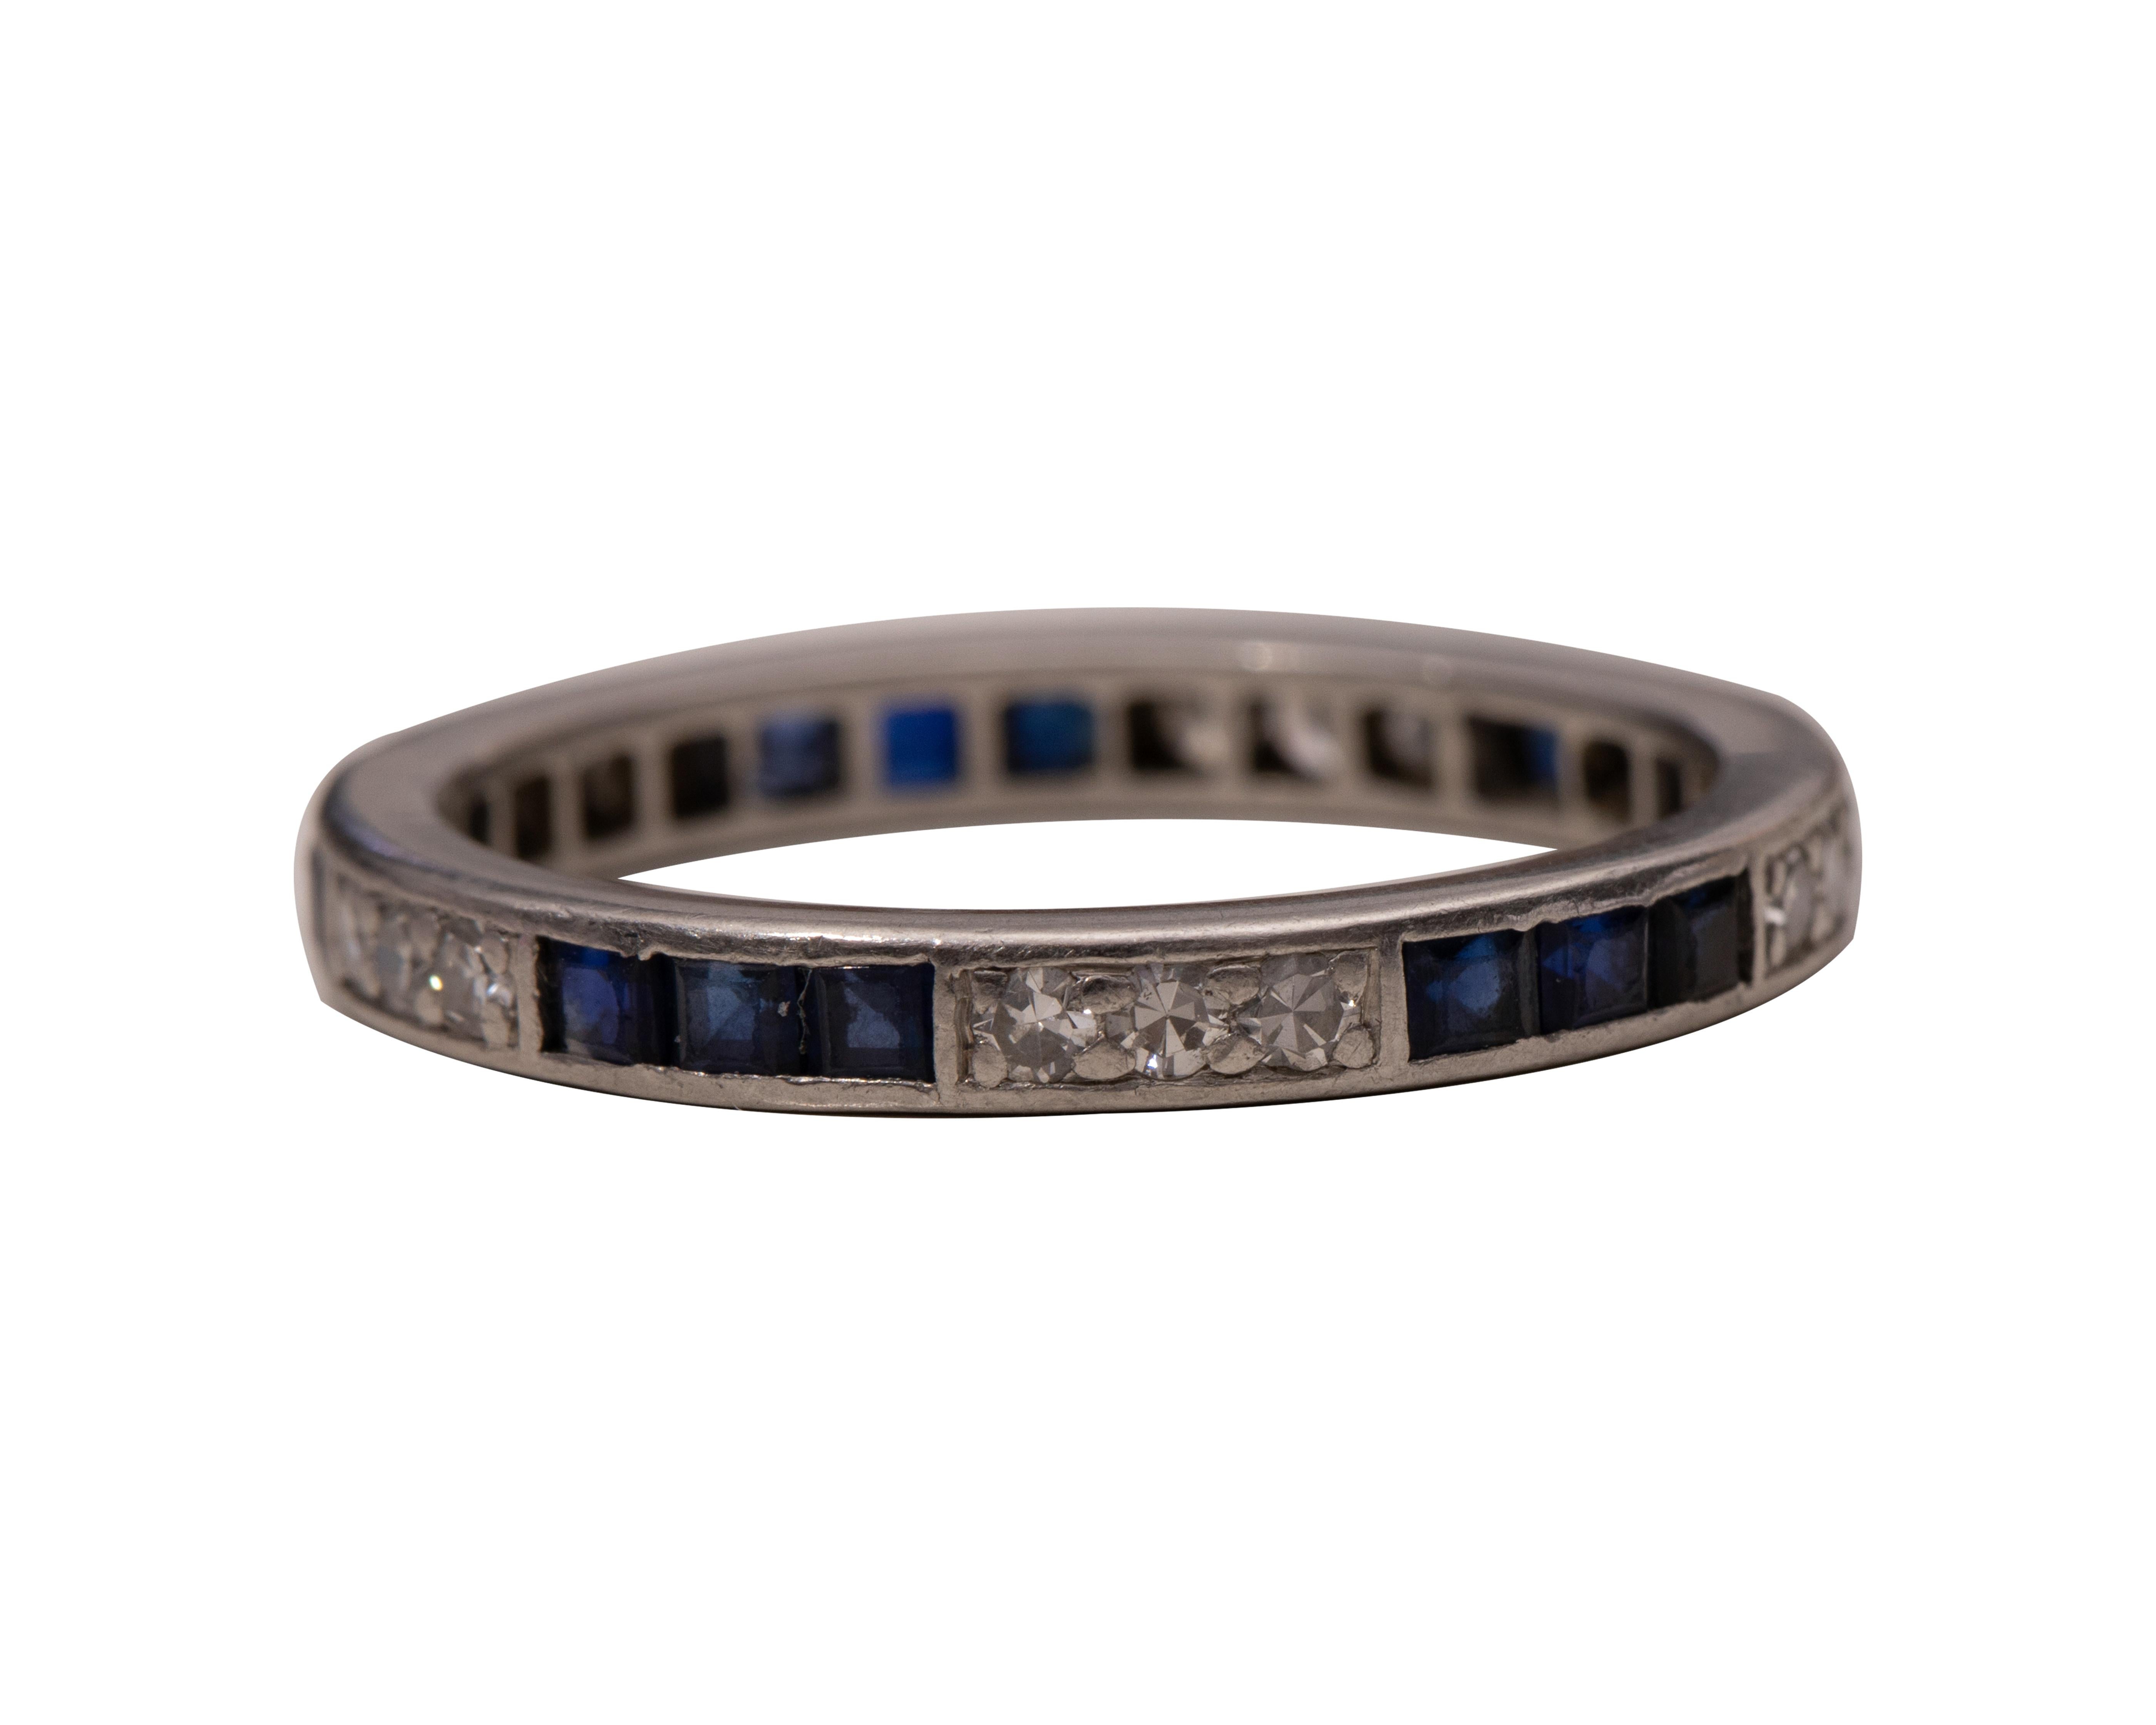 This piece is a genuine 1920s era Art Deco eternity band featuring a stylish pattern of alternating sections of diamond and blue sapphires set in platinum! There is a pierced open back pattern throughout the ring to allow light and brilliance to be